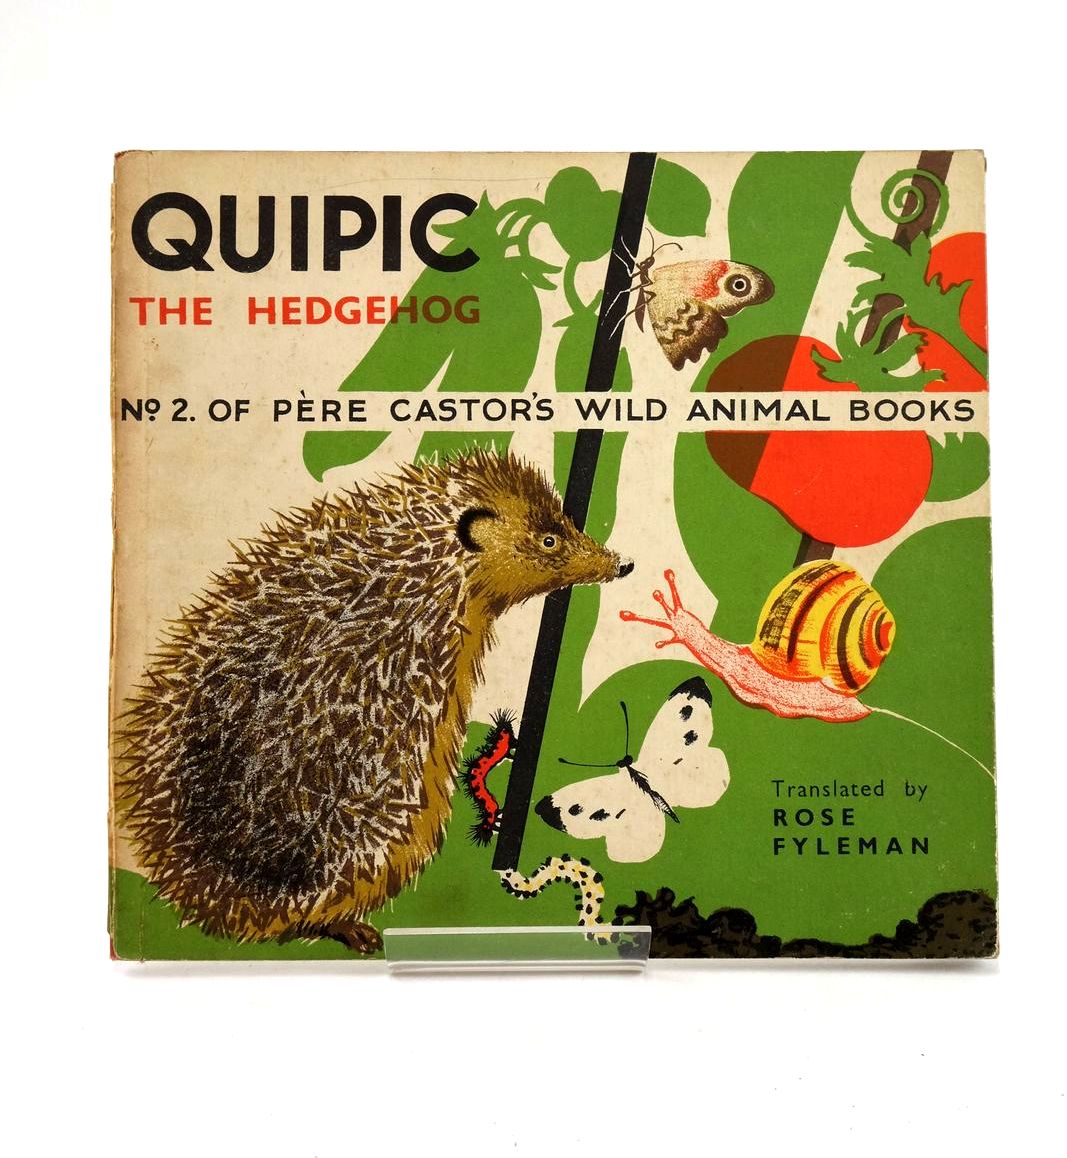 Photo of QUIPIC THE HEDGEHOG written by Lida, Fyleman, Rose illustrated by Rojan, published by George Allen &amp; Unwin Ltd. (STOCK CODE: 1324299)  for sale by Stella & Rose's Books